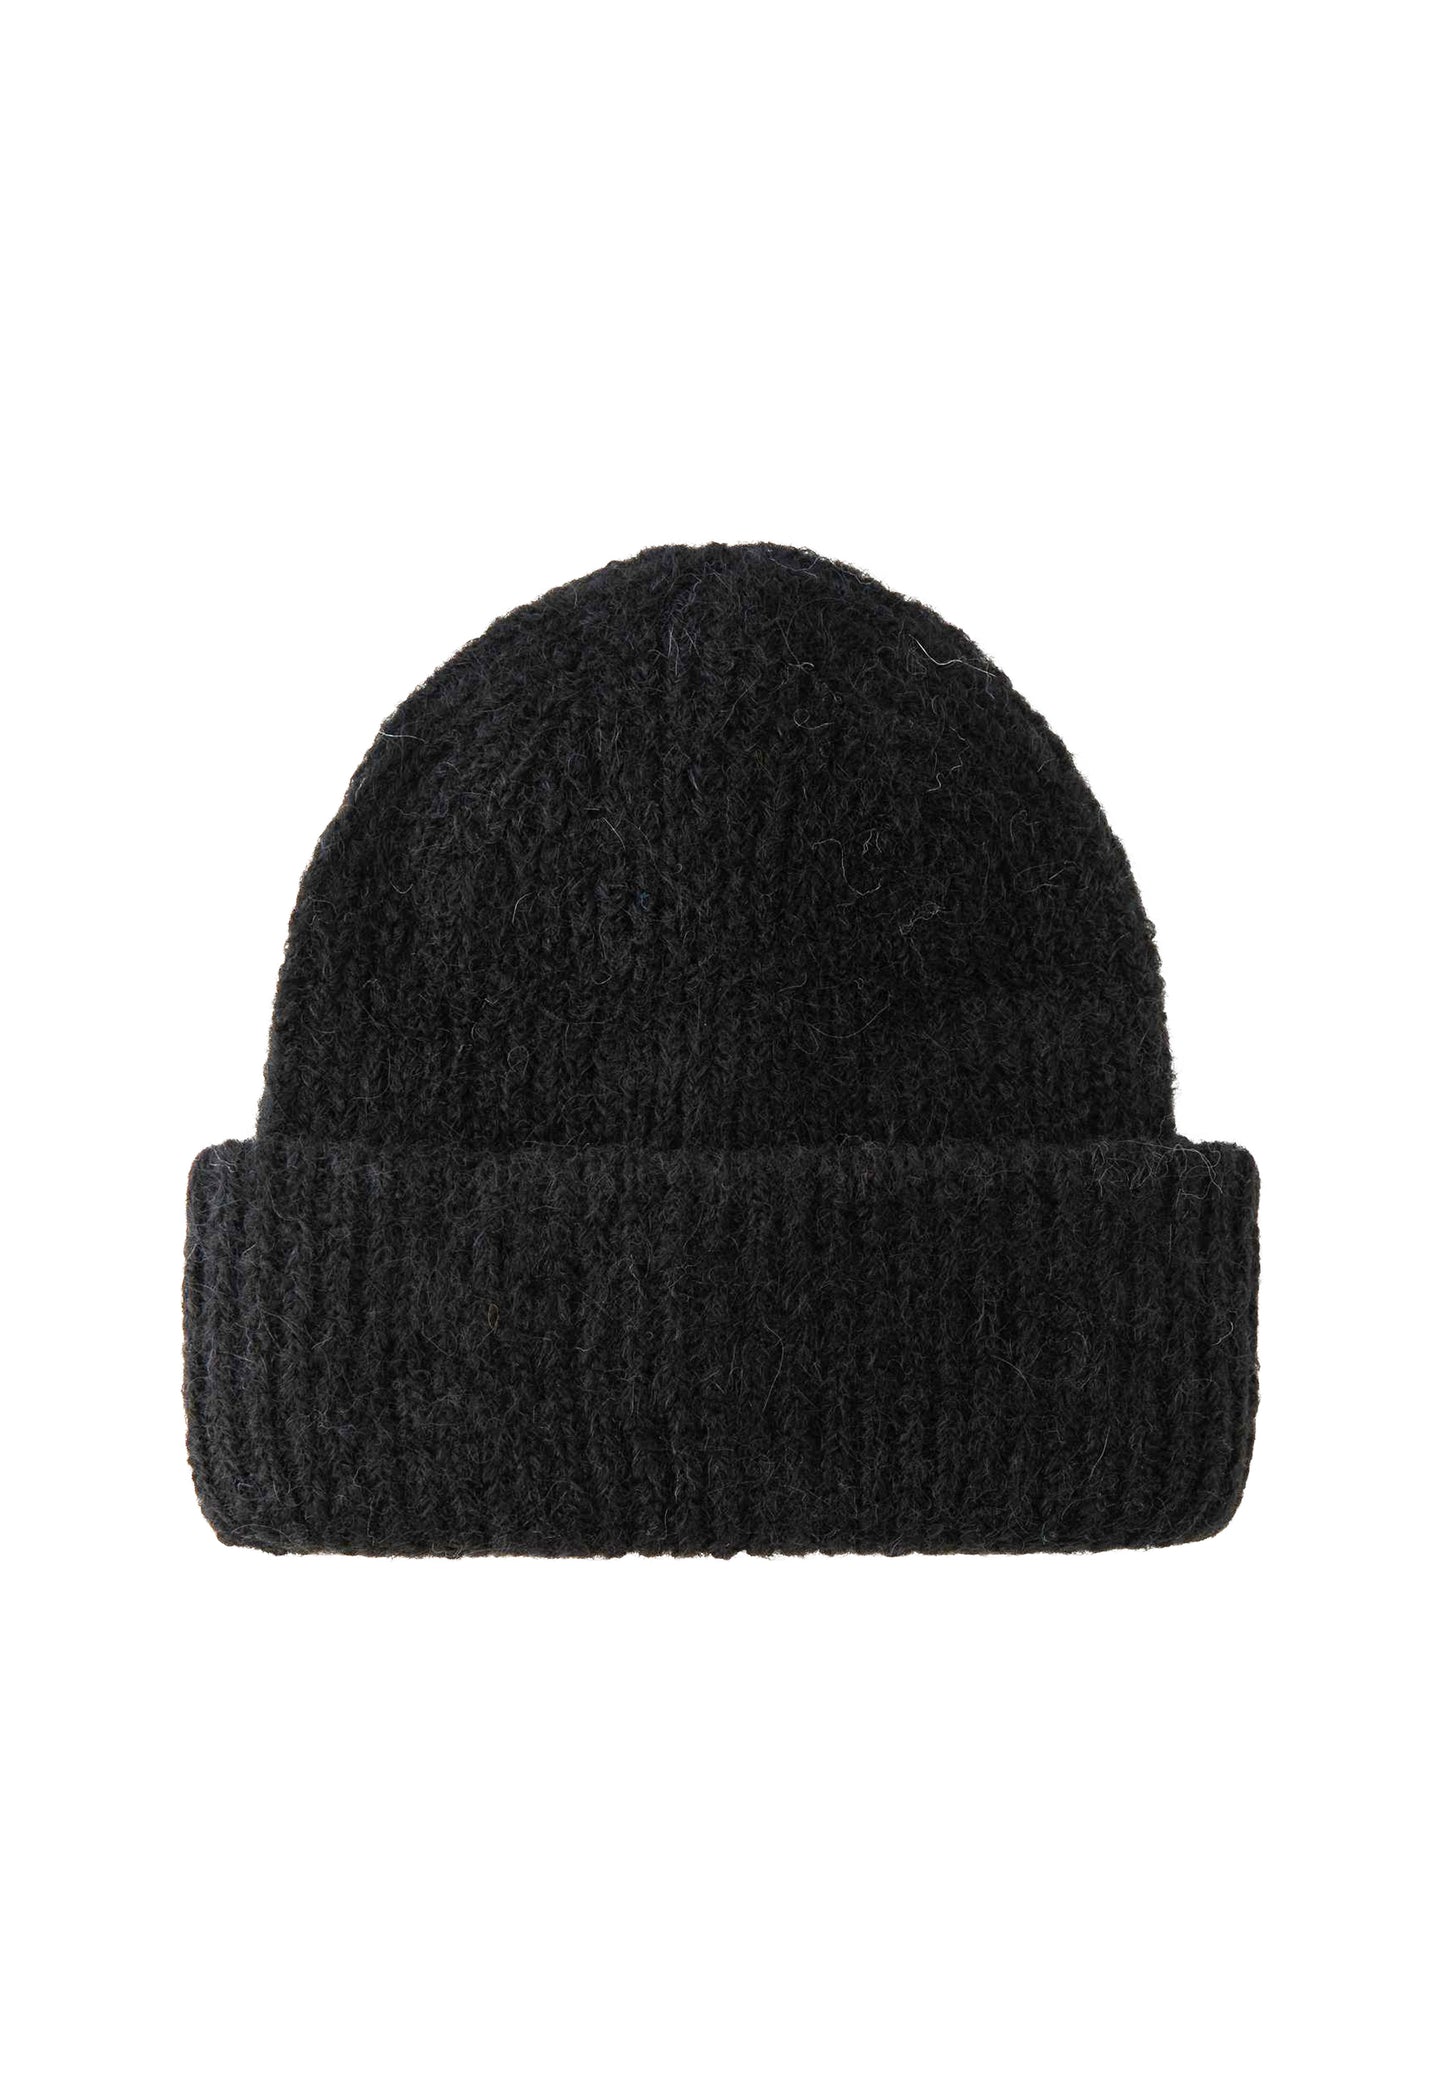 PIECES Fluffy Knit Ribbed Turn Up Beanie Hat in Black - concretebartops